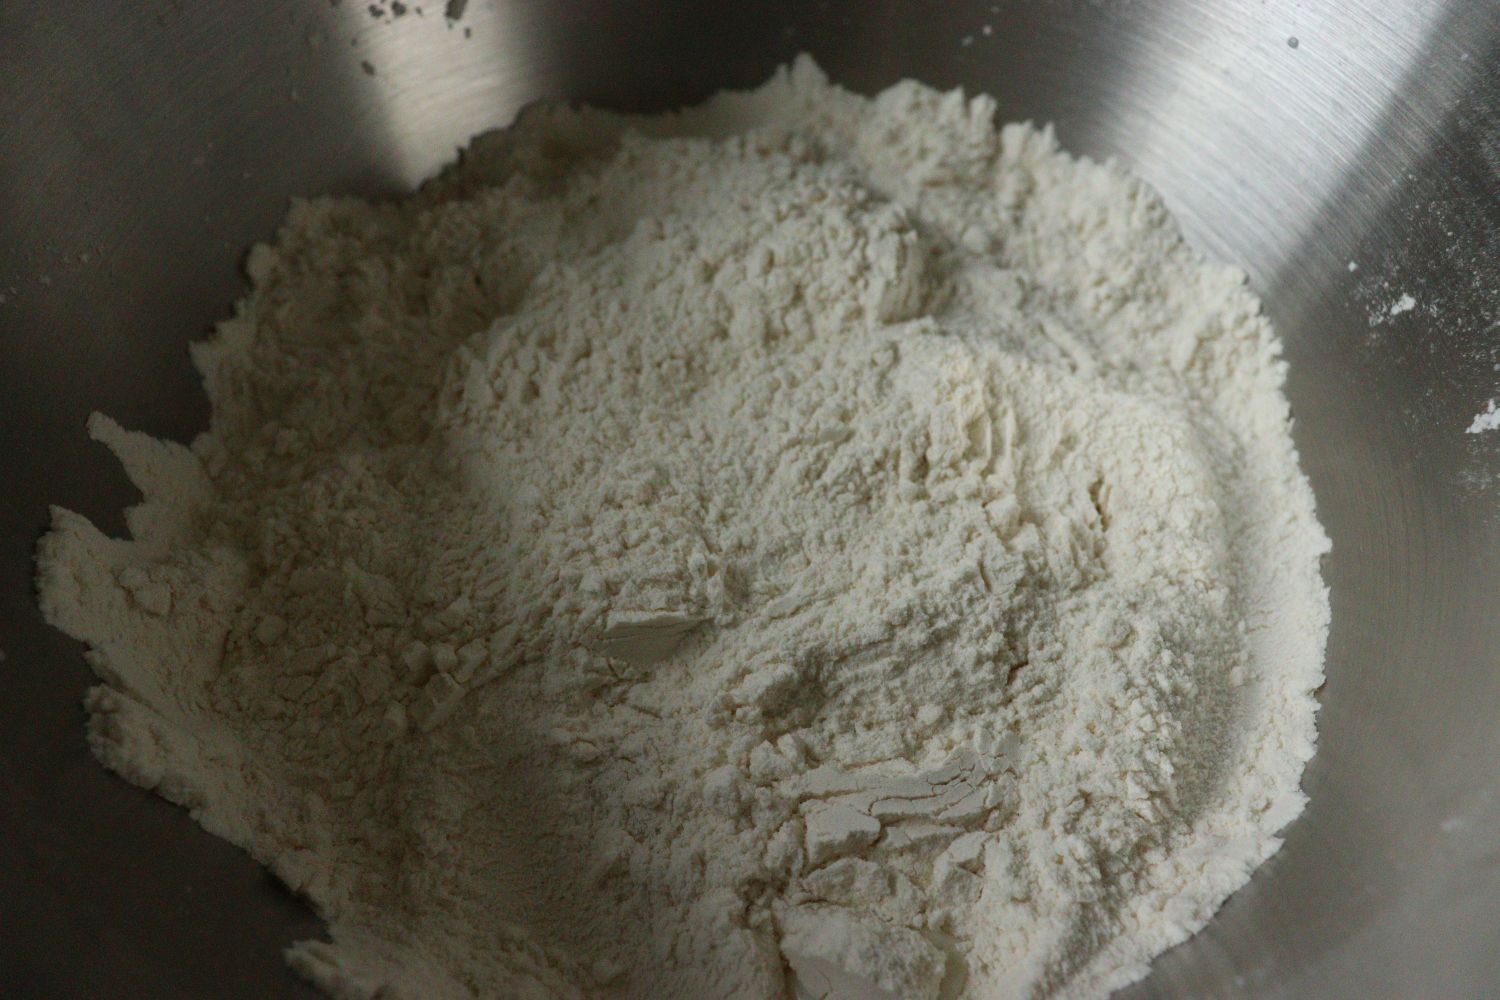 Flour mixed with salt, added yeast, sugar and milk in the middle, and covered with flour from the sides, for Yeast Dough - Hefeteig. 